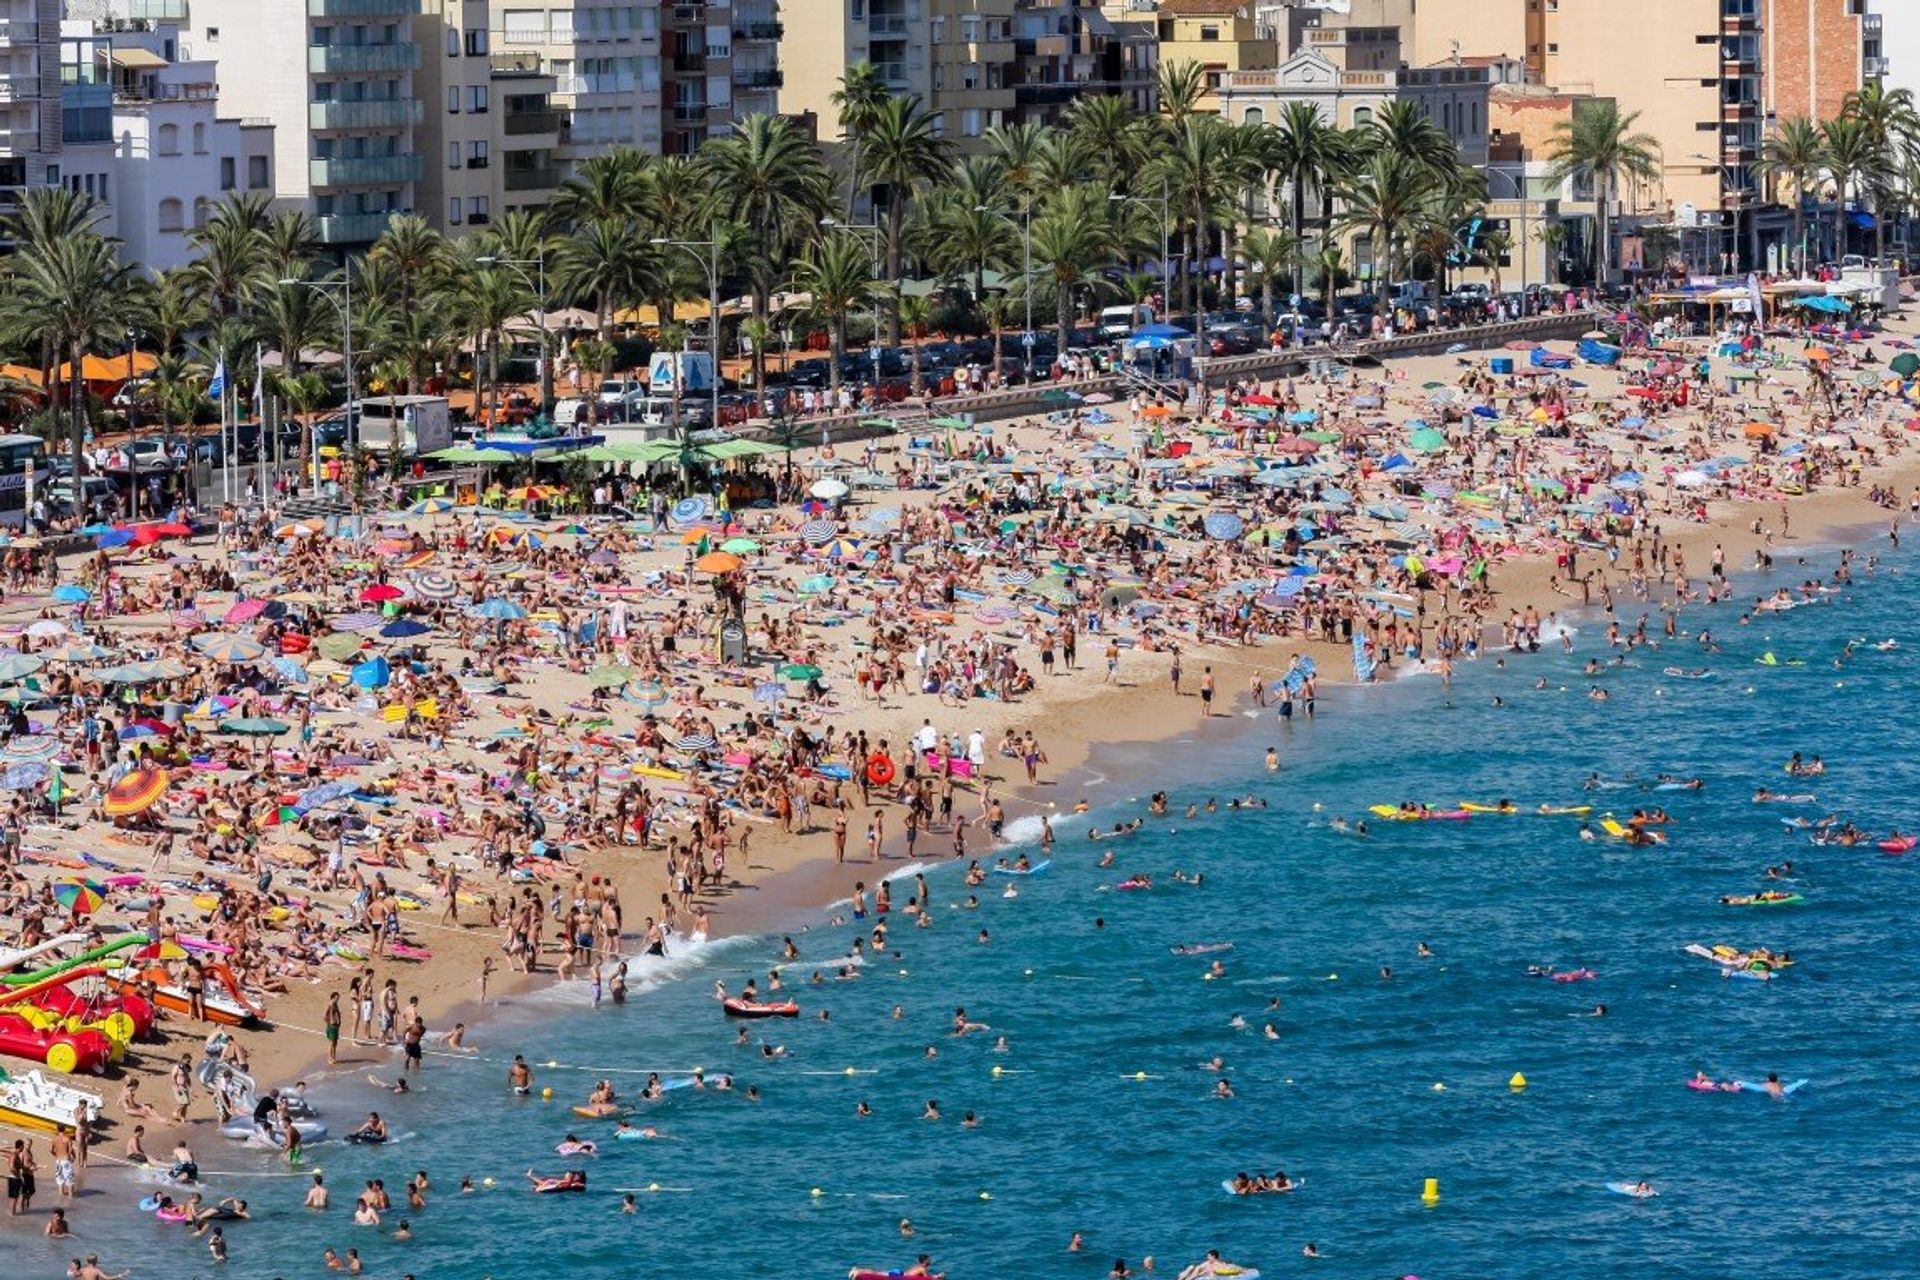 Lloret de Mar is home to some of the most popular Blue Flag beaches on the Costa Brava